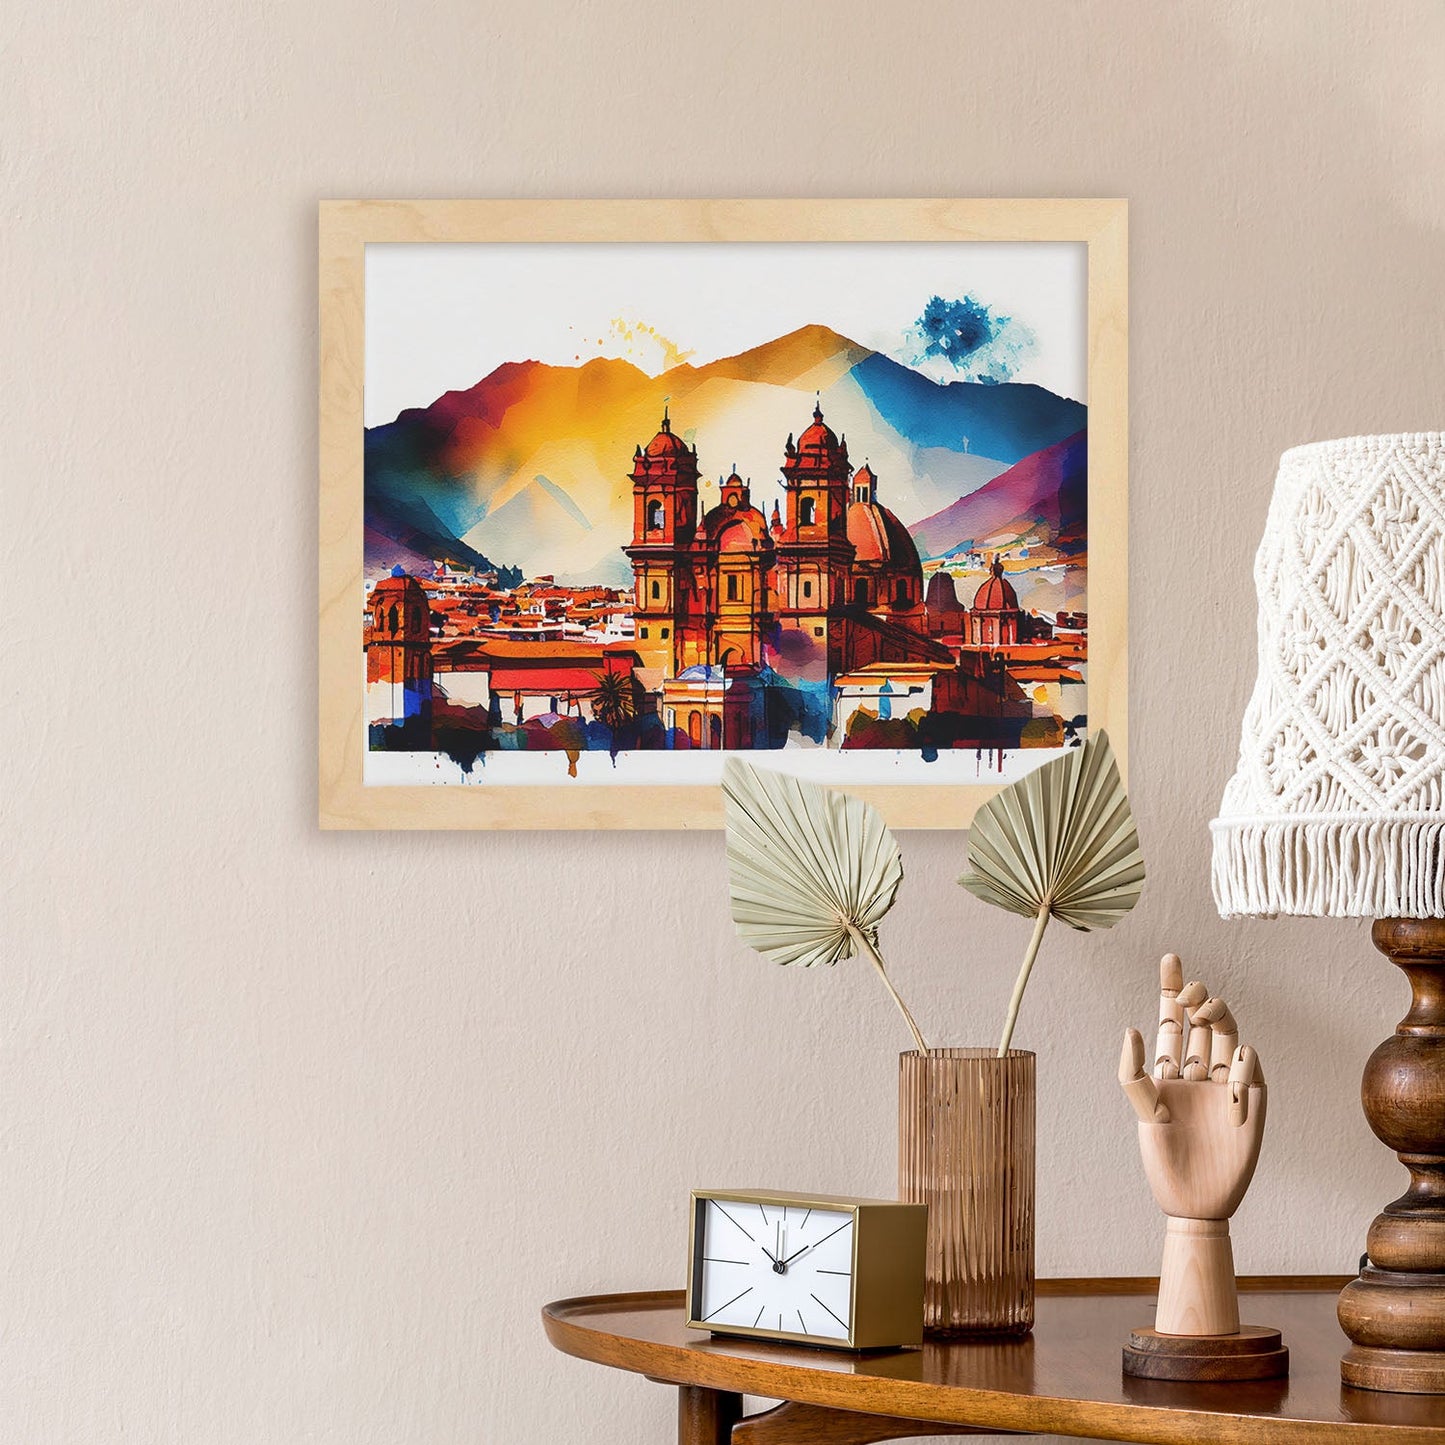 Nacnic watercolor of a skyline of the city of Cusco. Aesthetic Wall Art Prints for Bedroom or Living Room Design.